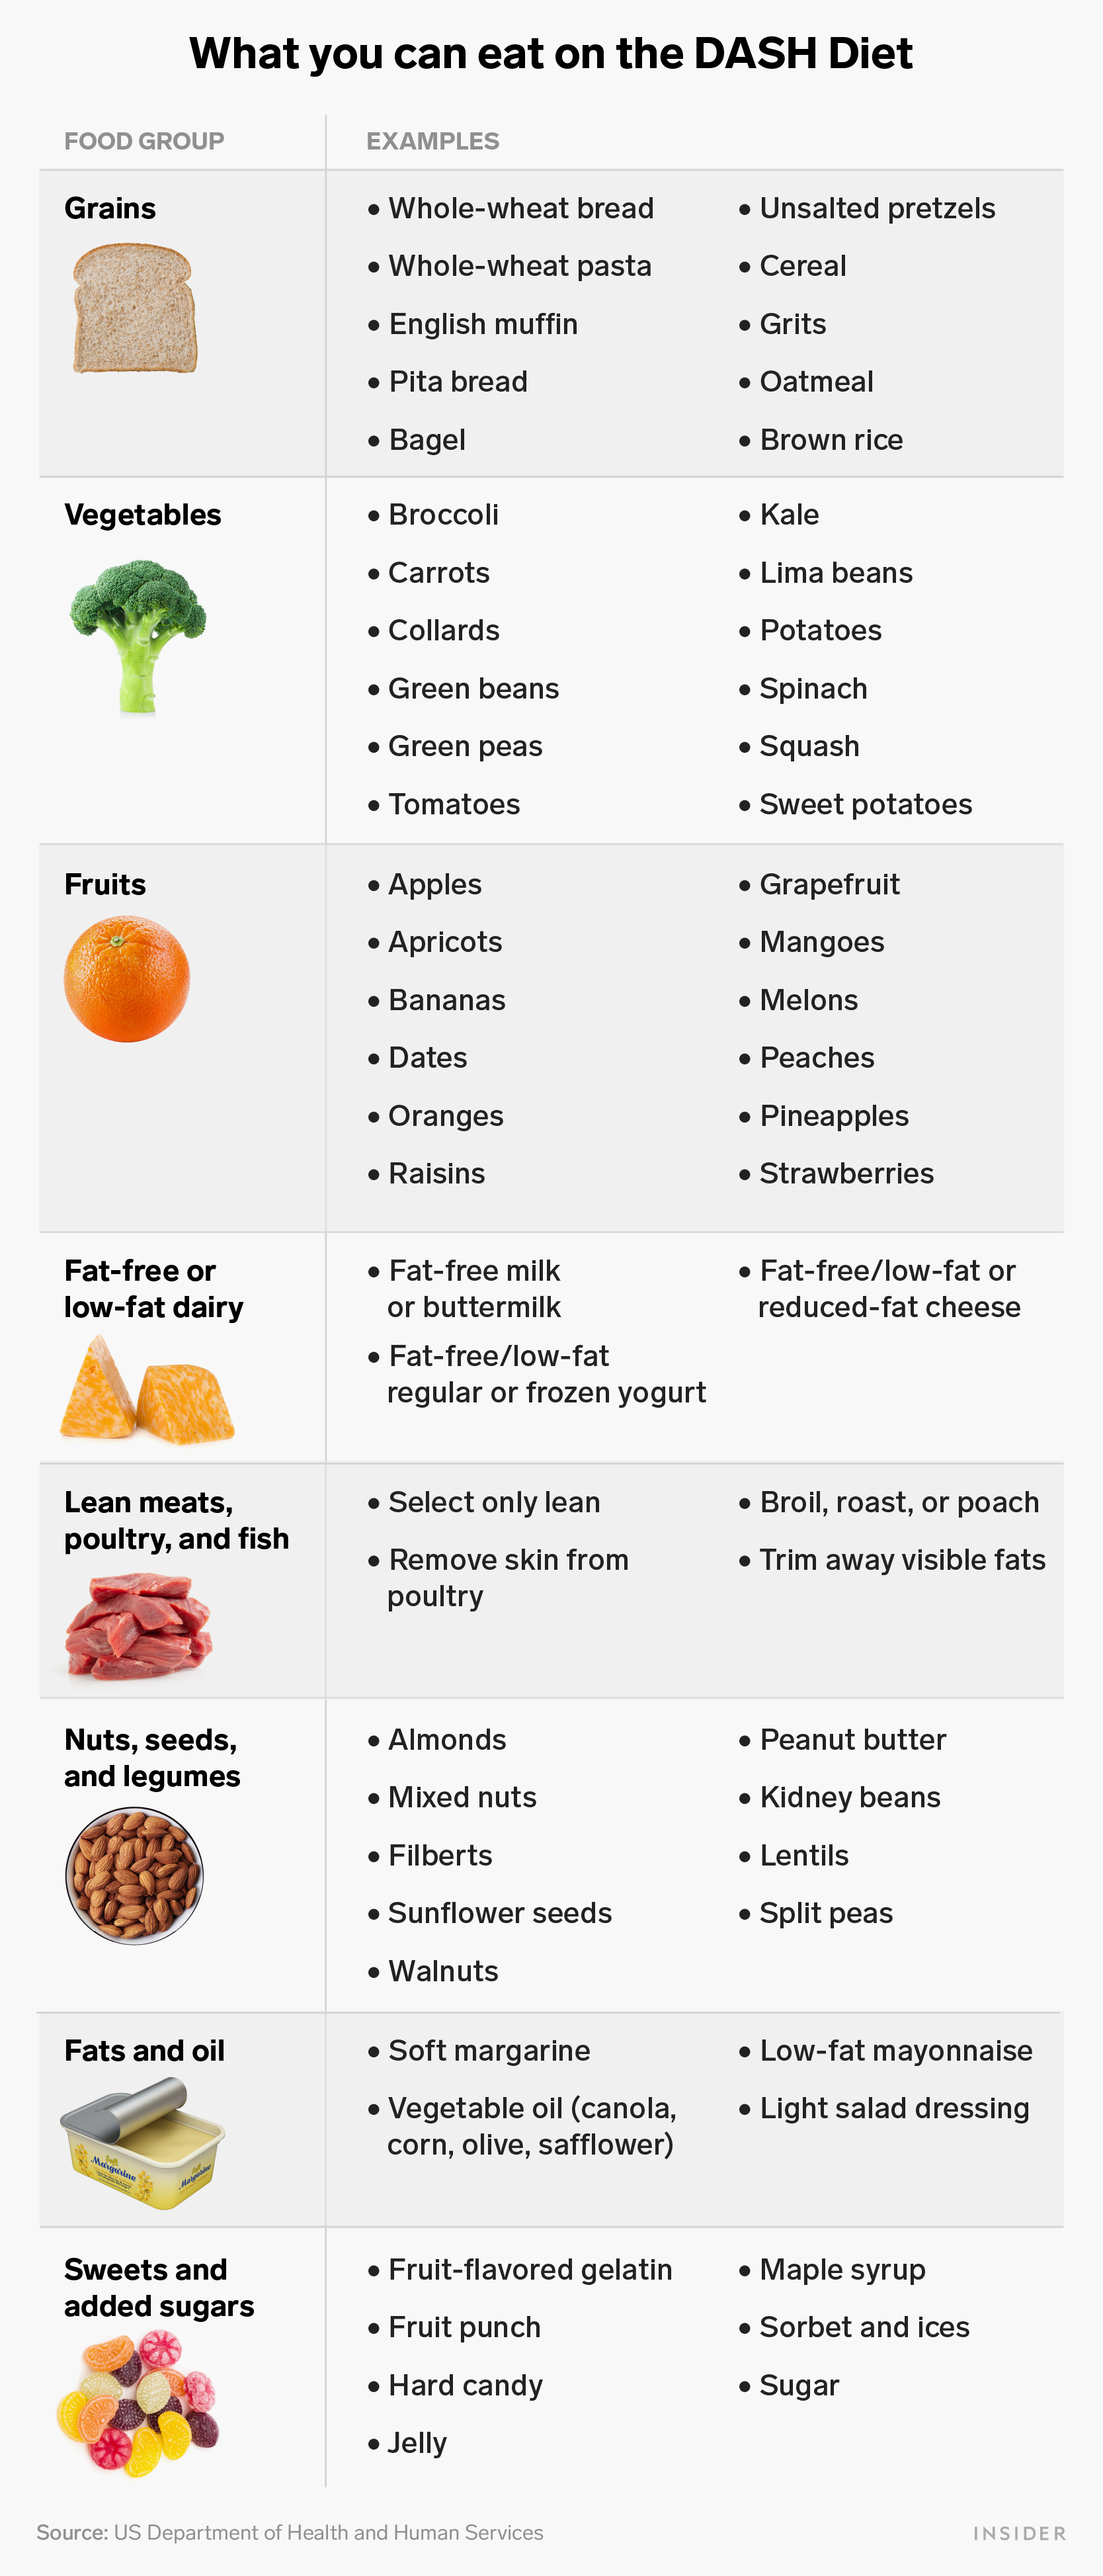 what you can eat on the DASH diet